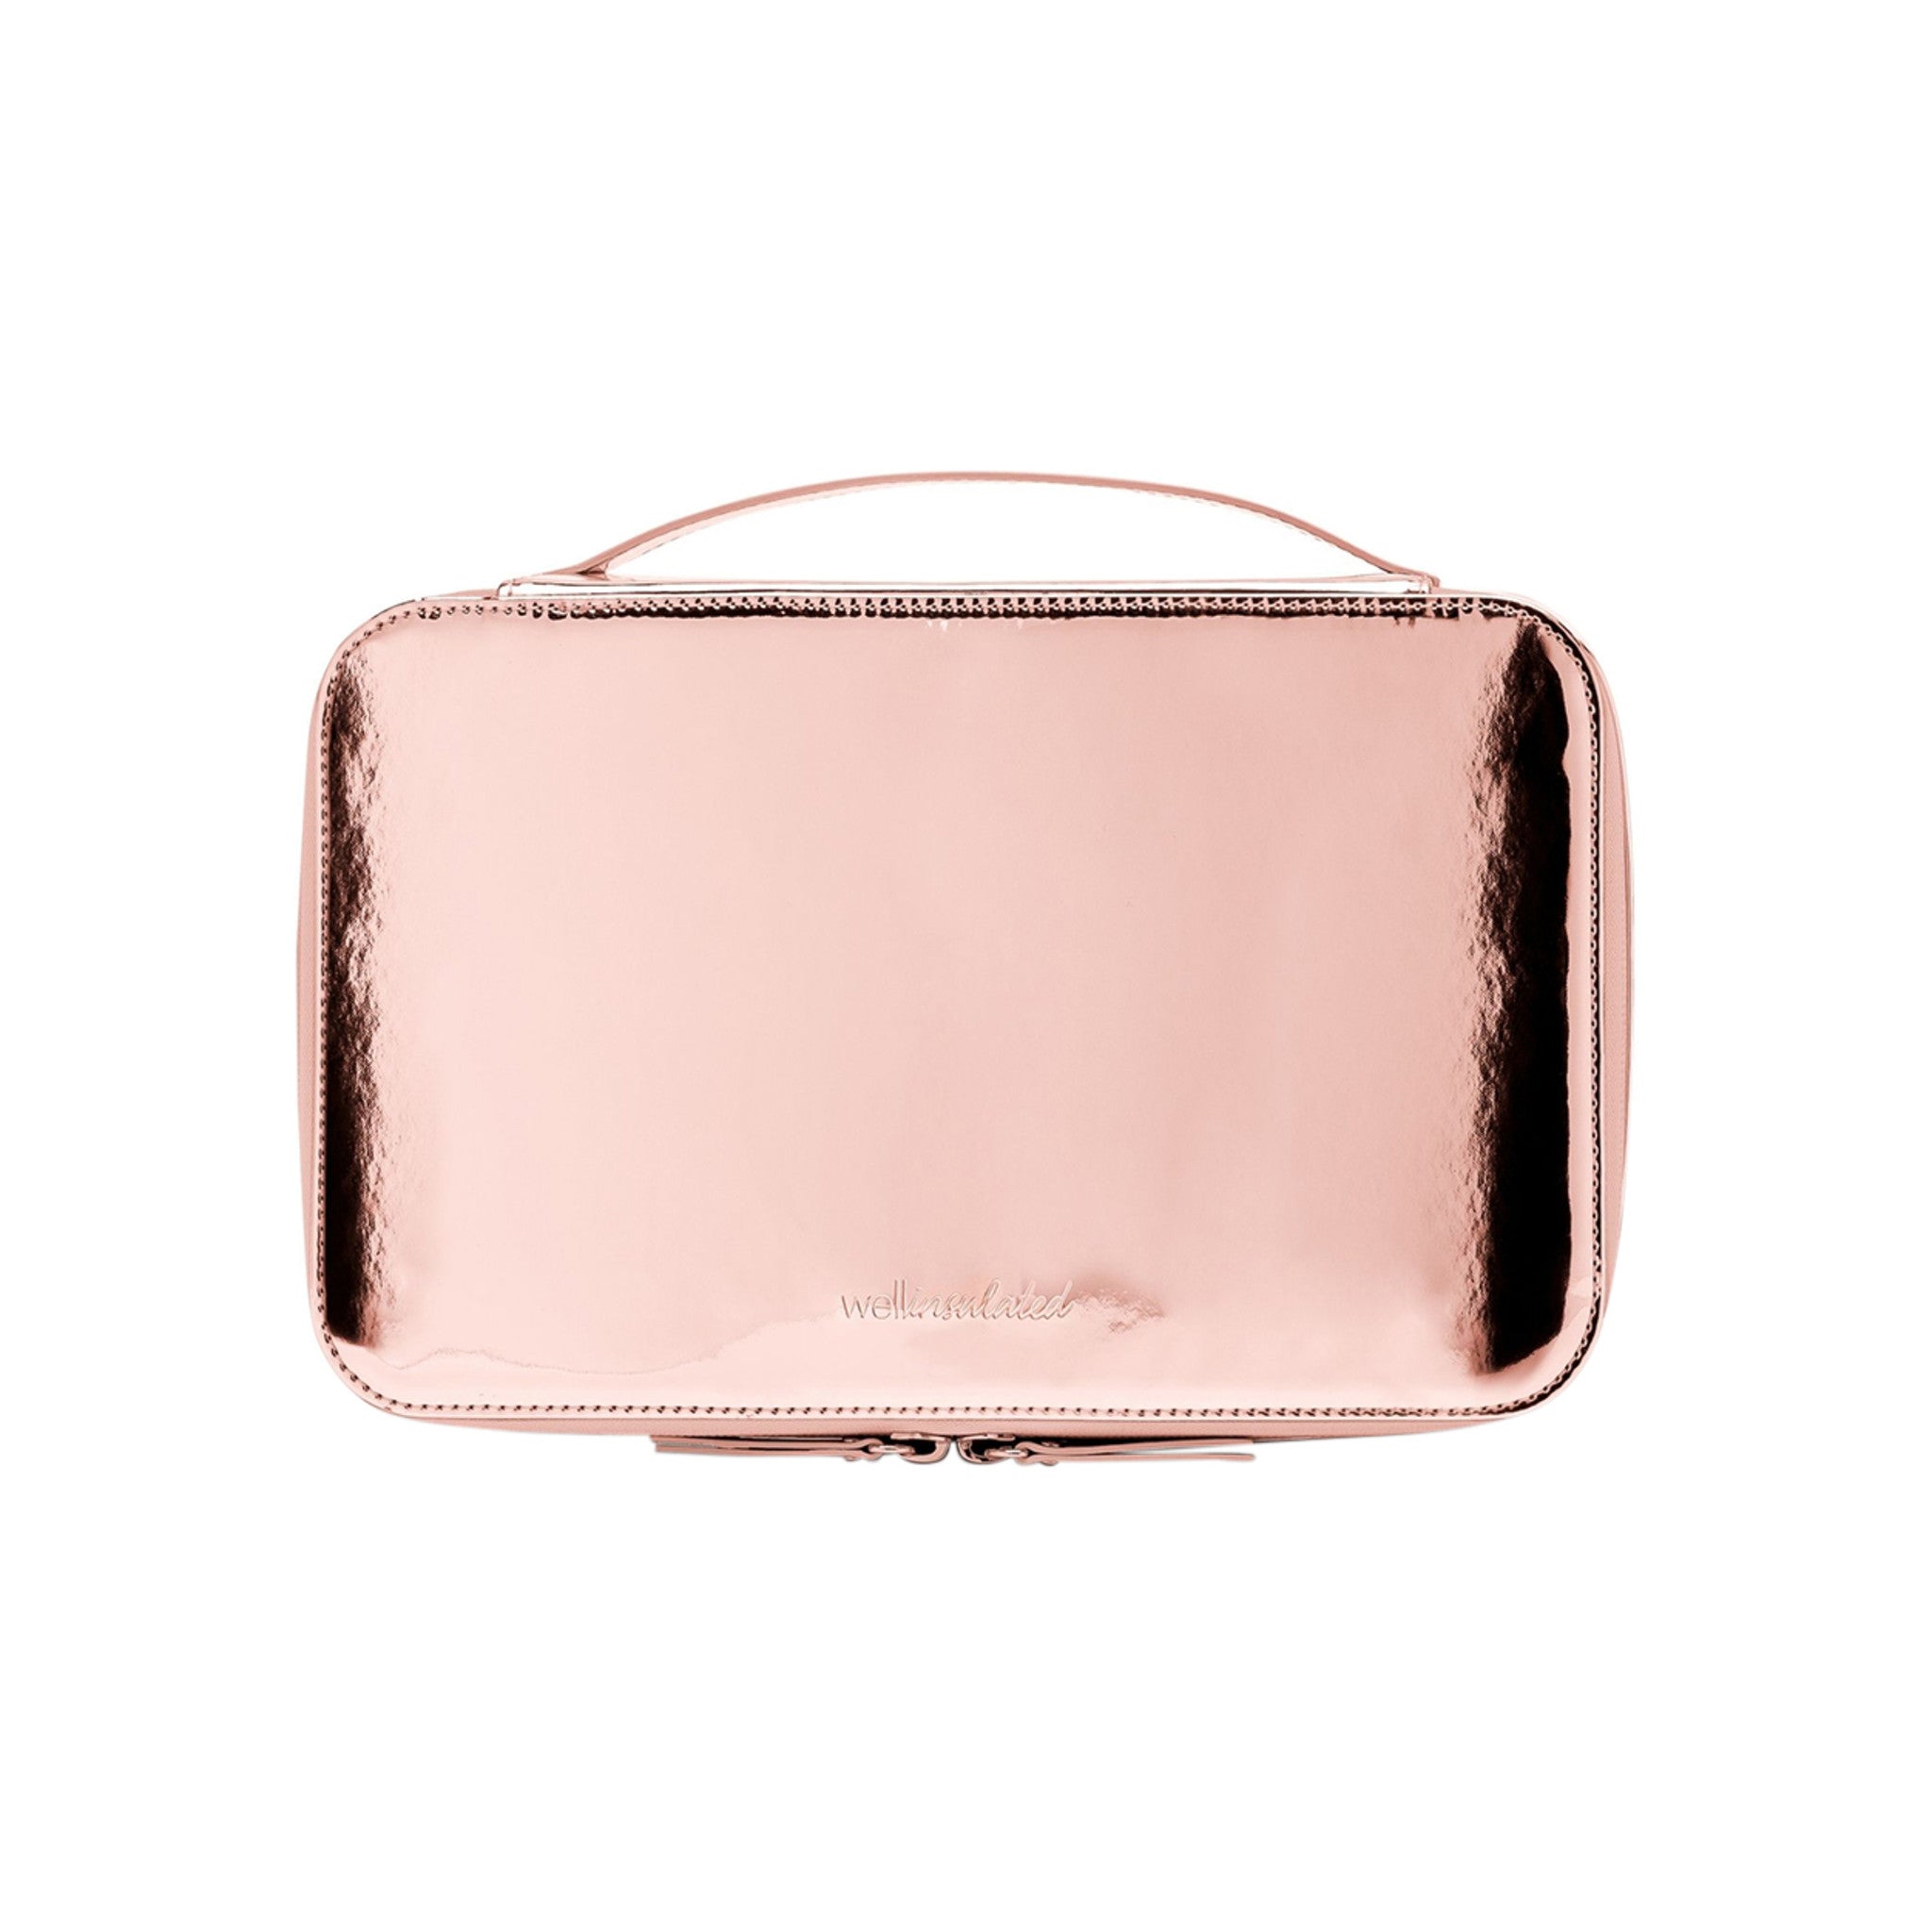 Wellinsulated Performance Travel Case Color/Shade variant: Rose Gold main image.